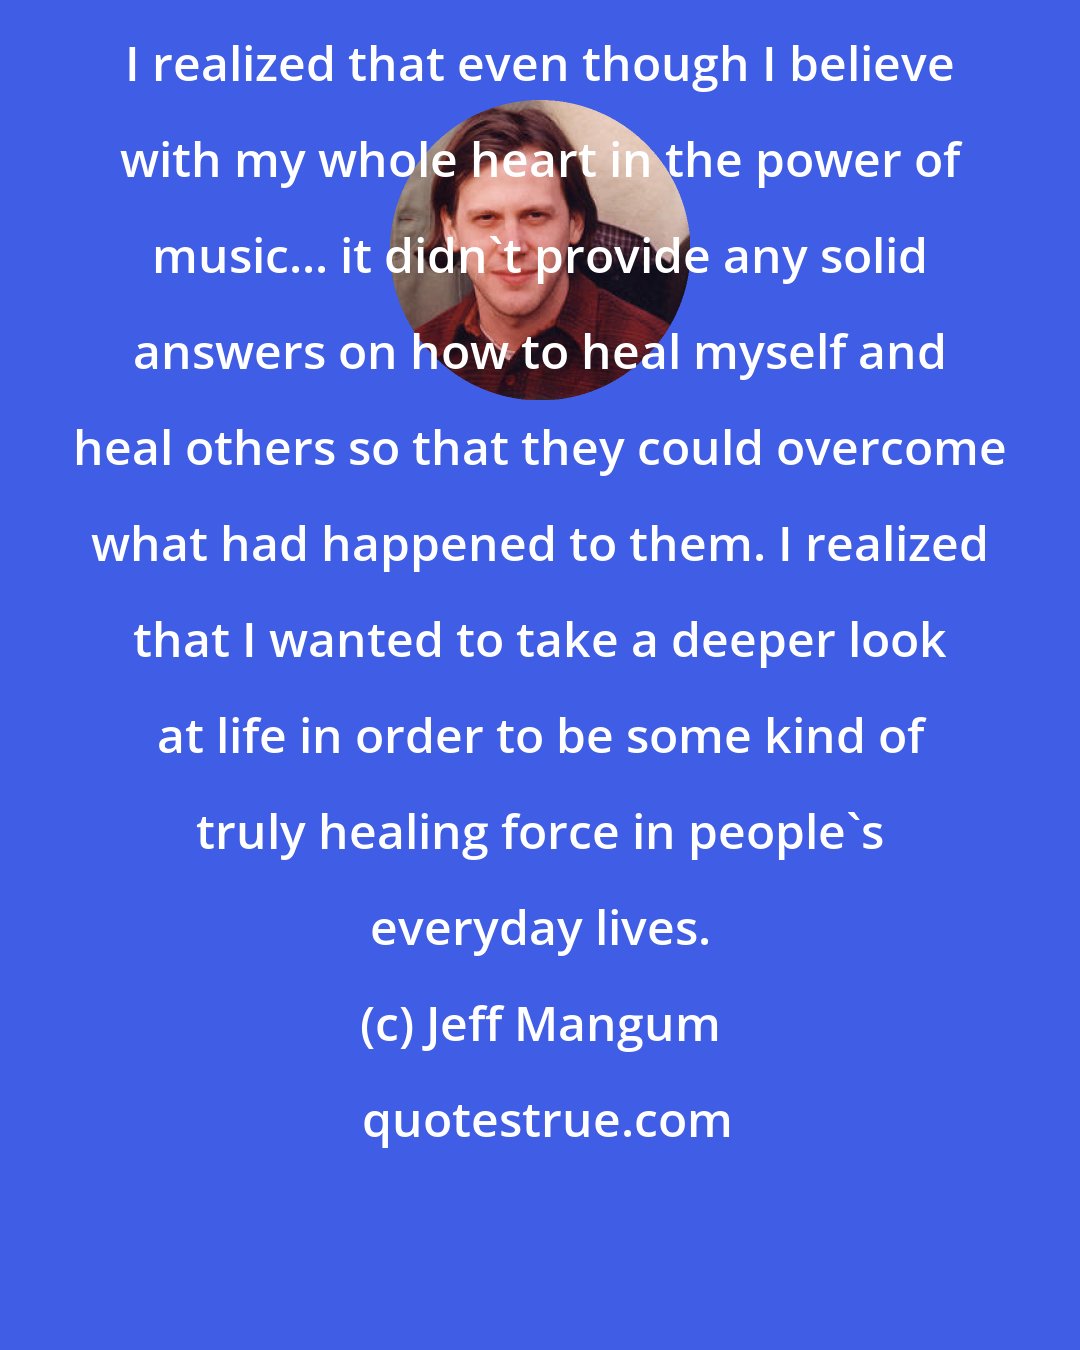 Jeff Mangum: I realized that even though I believe with my whole heart in the power of music... it didn't provide any solid answers on how to heal myself and heal others so that they could overcome what had happened to them. I realized that I wanted to take a deeper look at life in order to be some kind of truly healing force in people's everyday lives.